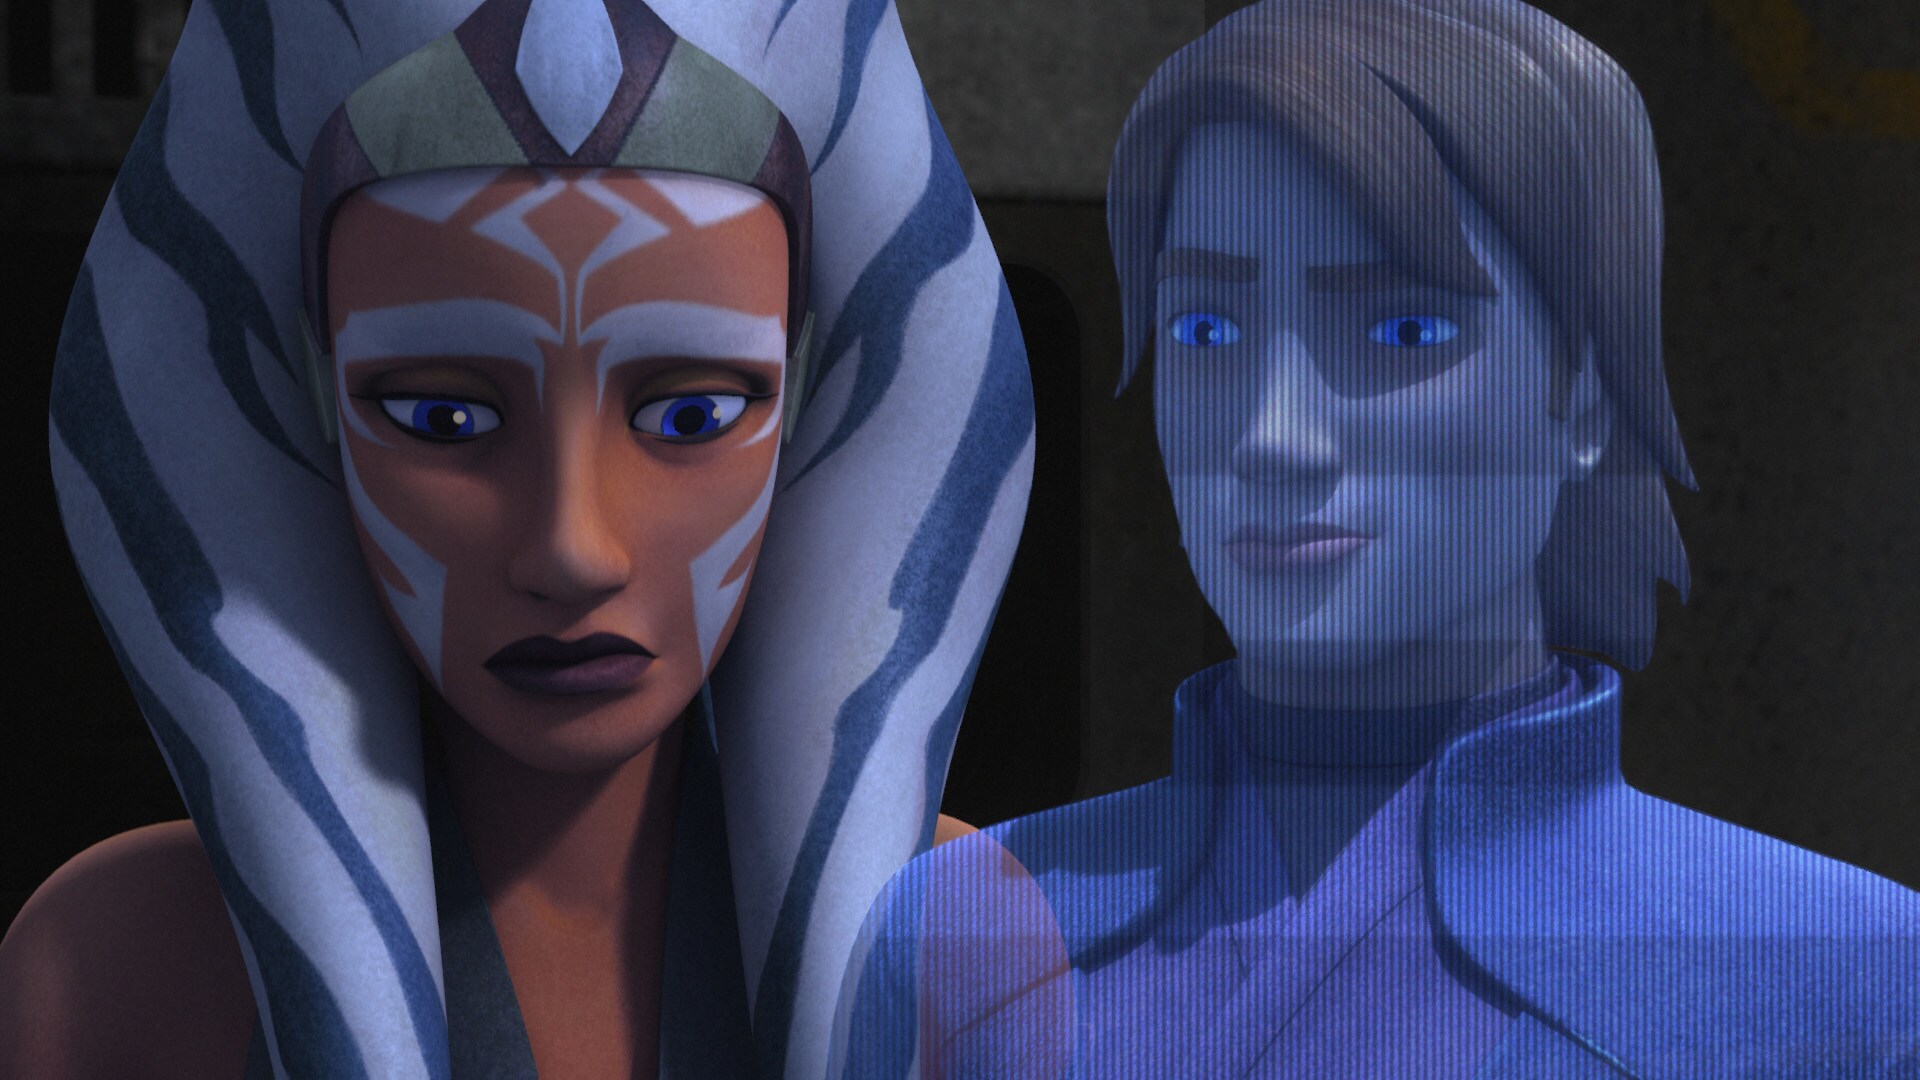 Ahsoka tells of how kind Anakin was, and how he loved his friends. "Do you know what happened to ...